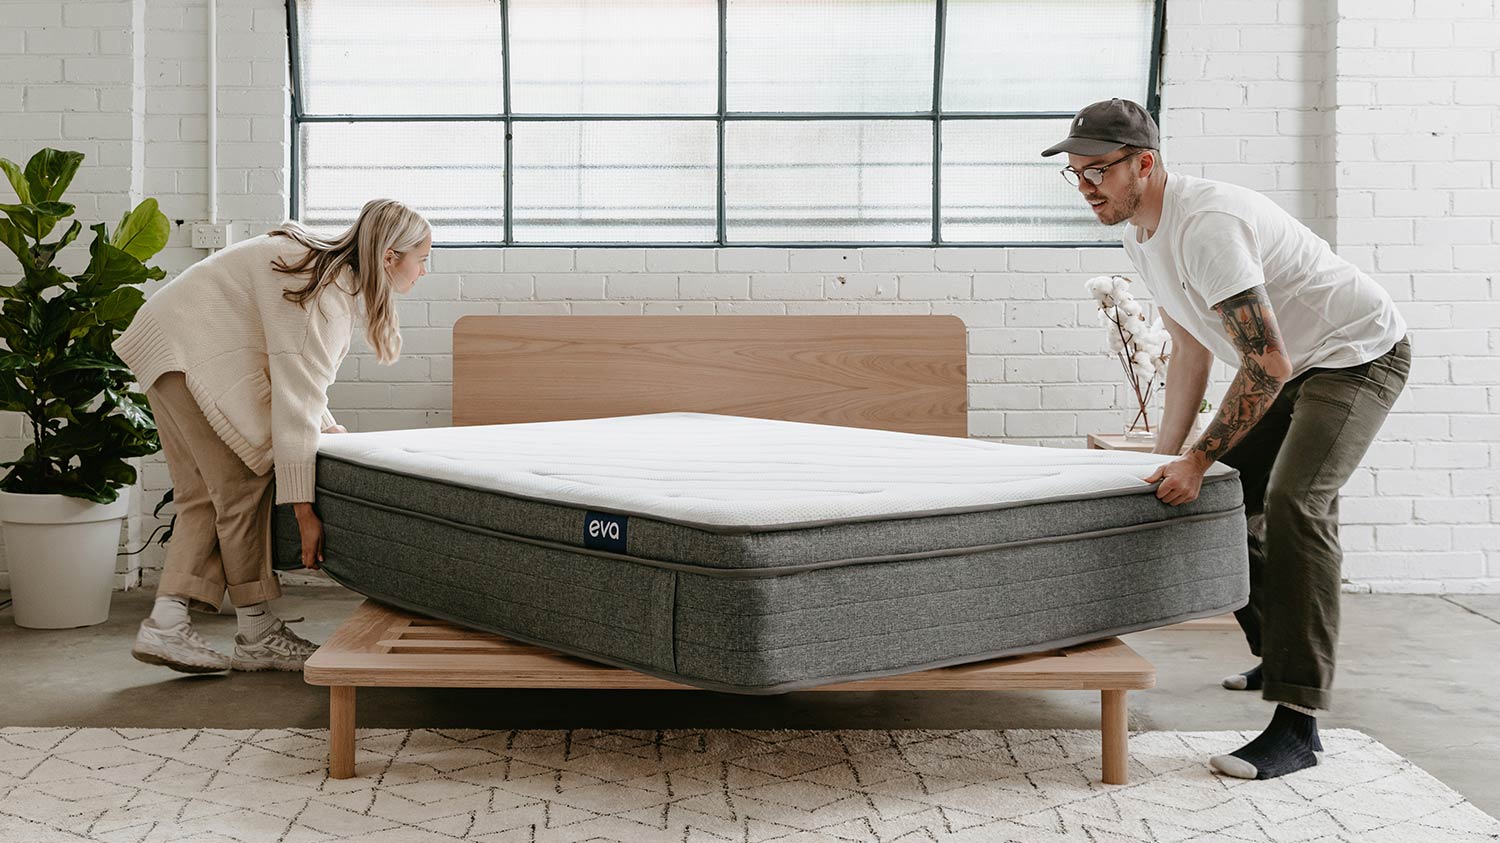 Man and woman putting mattress on bed base 